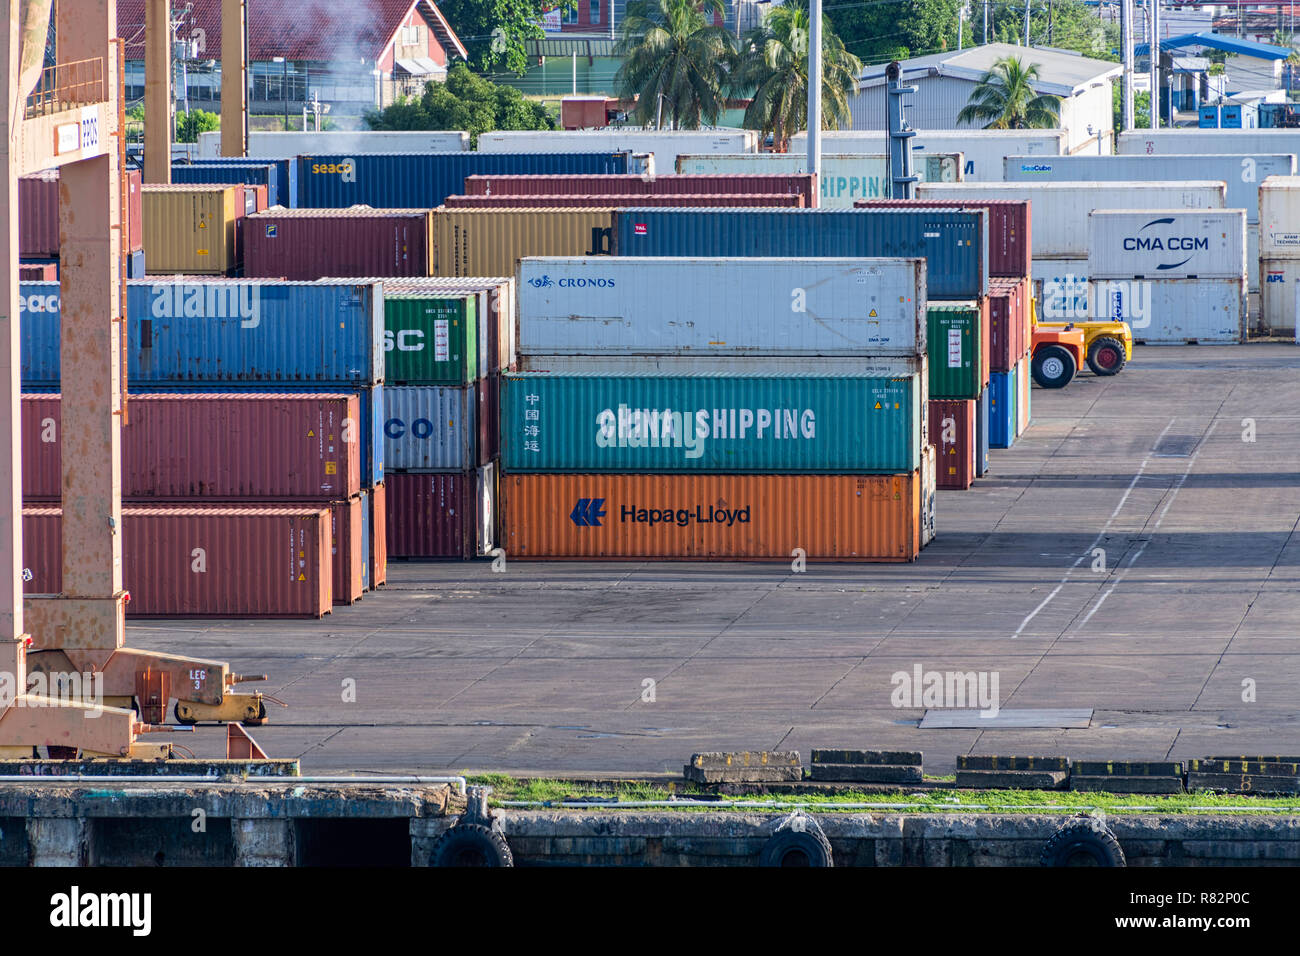 Shipping containers Port of Spain Trinidad & Tobago Stock Photo